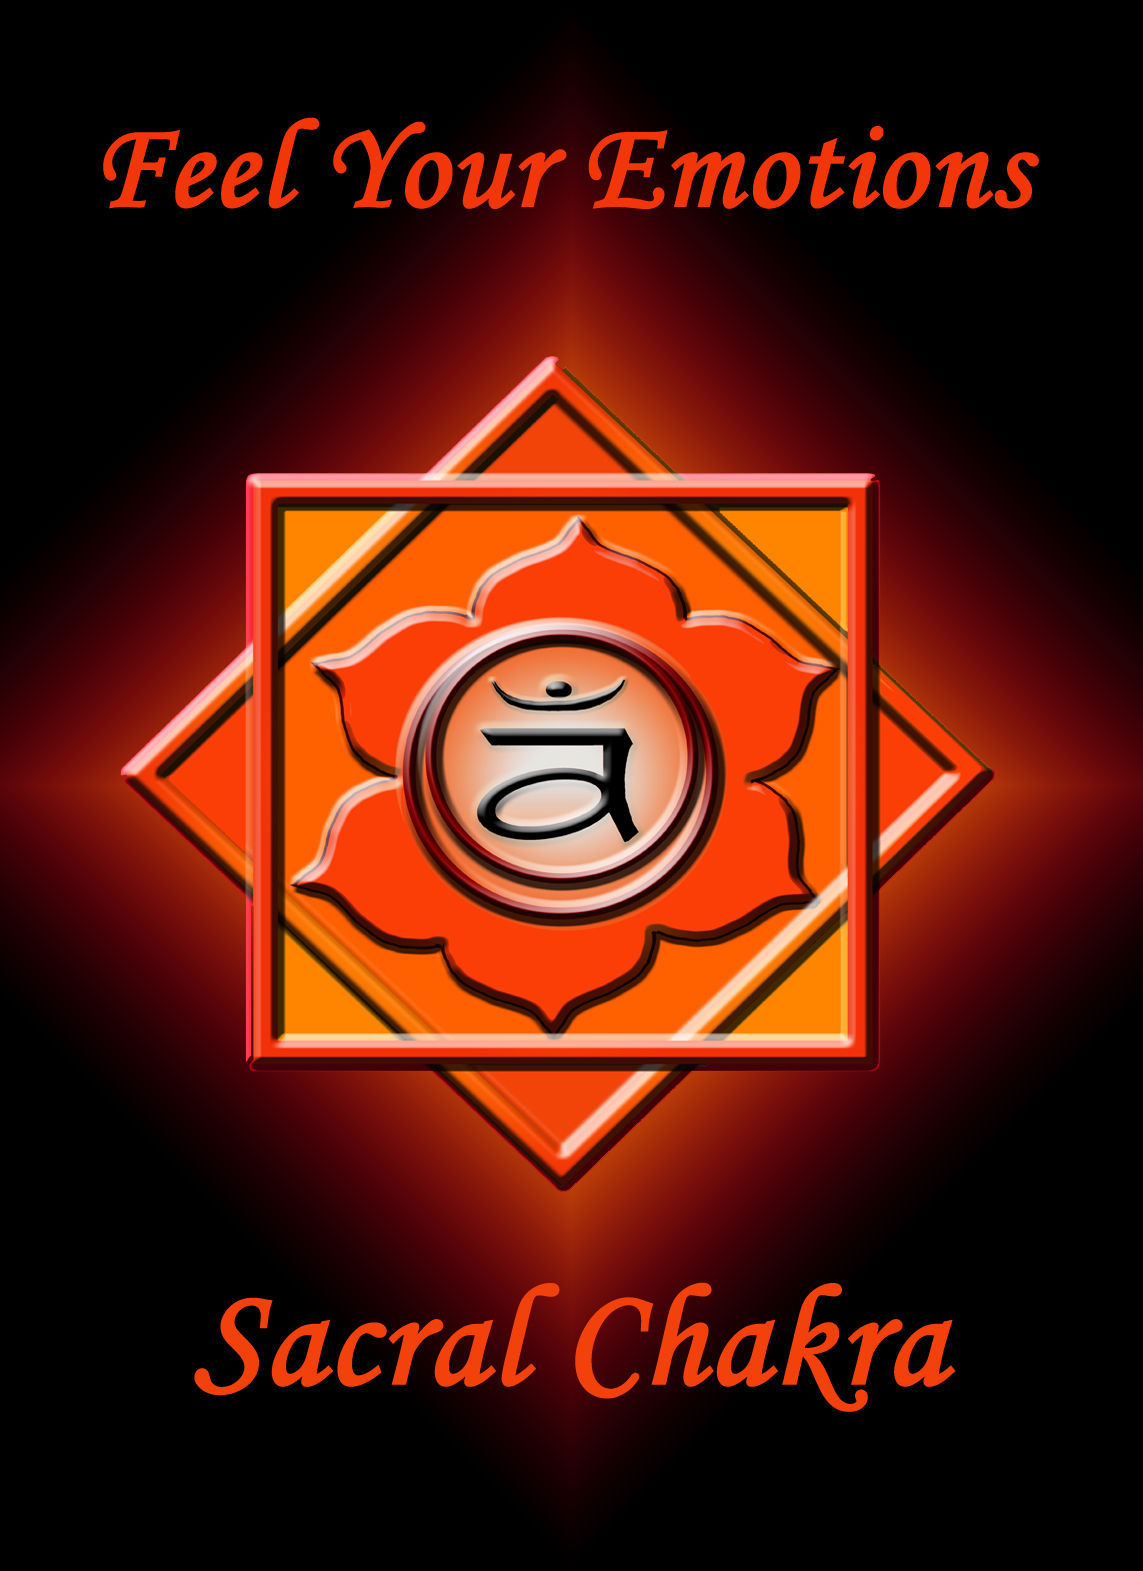 REIKI SACRAL 2ND CHAKRA BALANCING FROM A DISTANCE CLEARING & HEALING SESSION  - $44.00